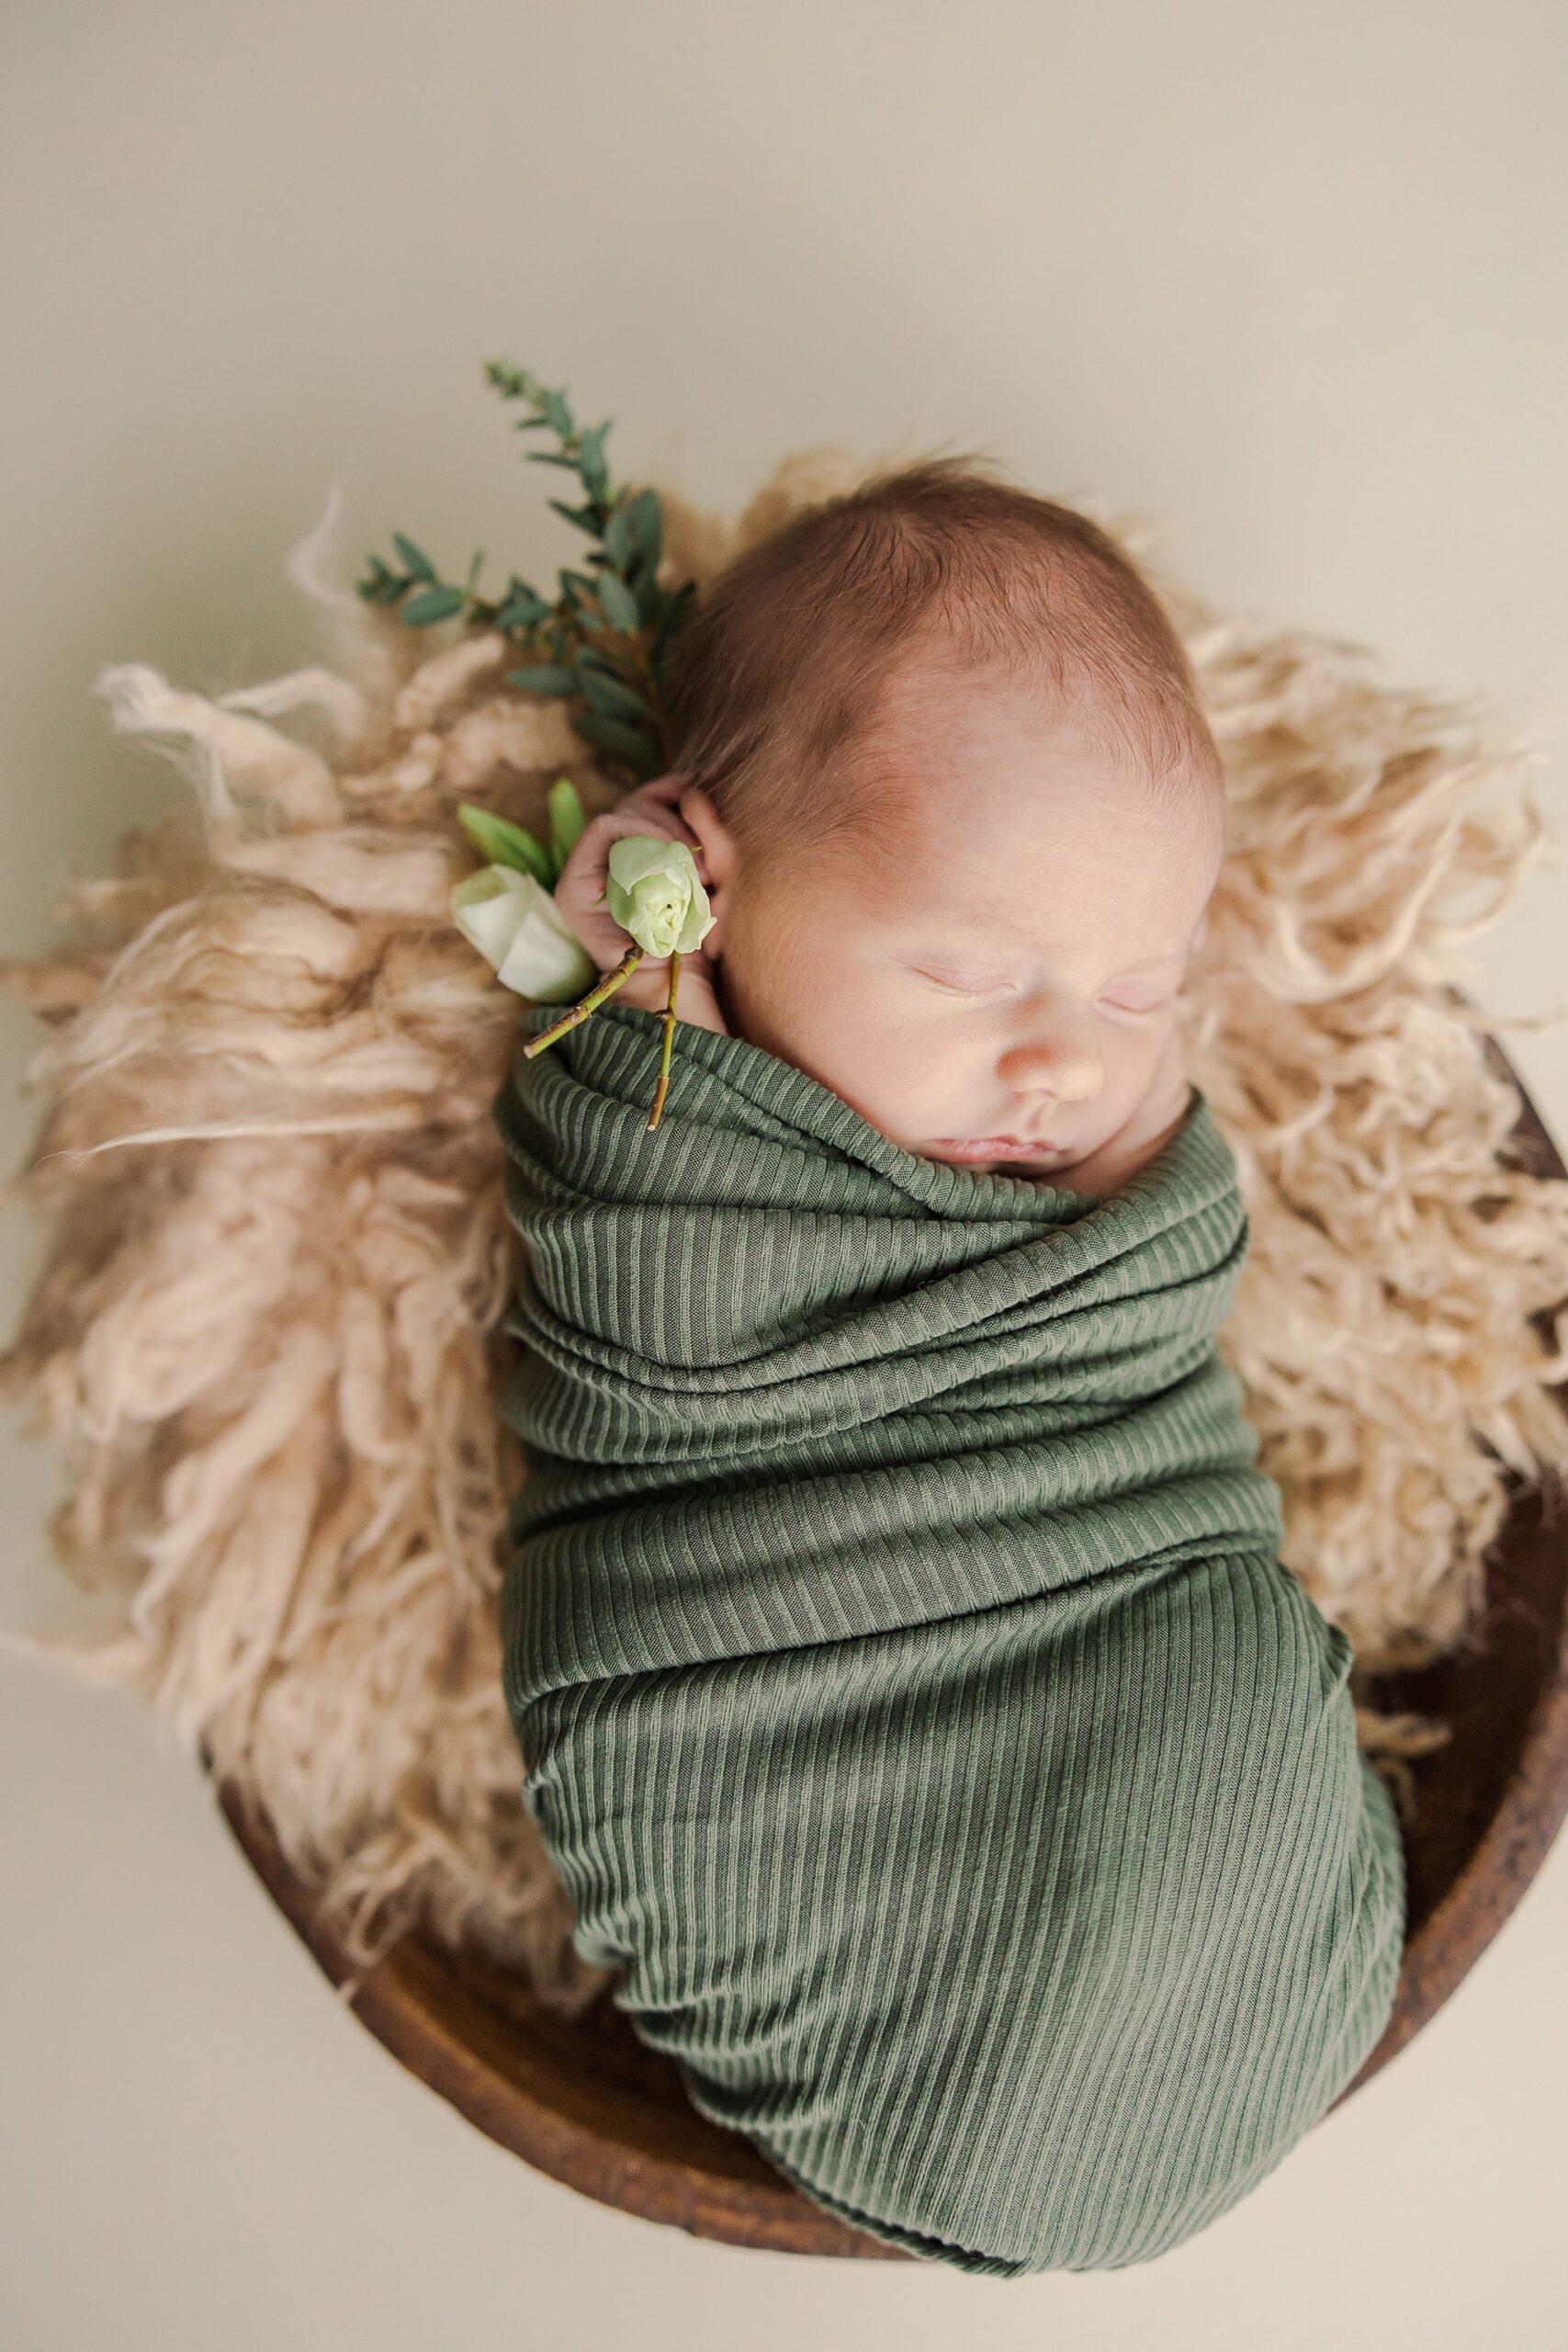 baby swaddled in green wrap with cream fur in bowl